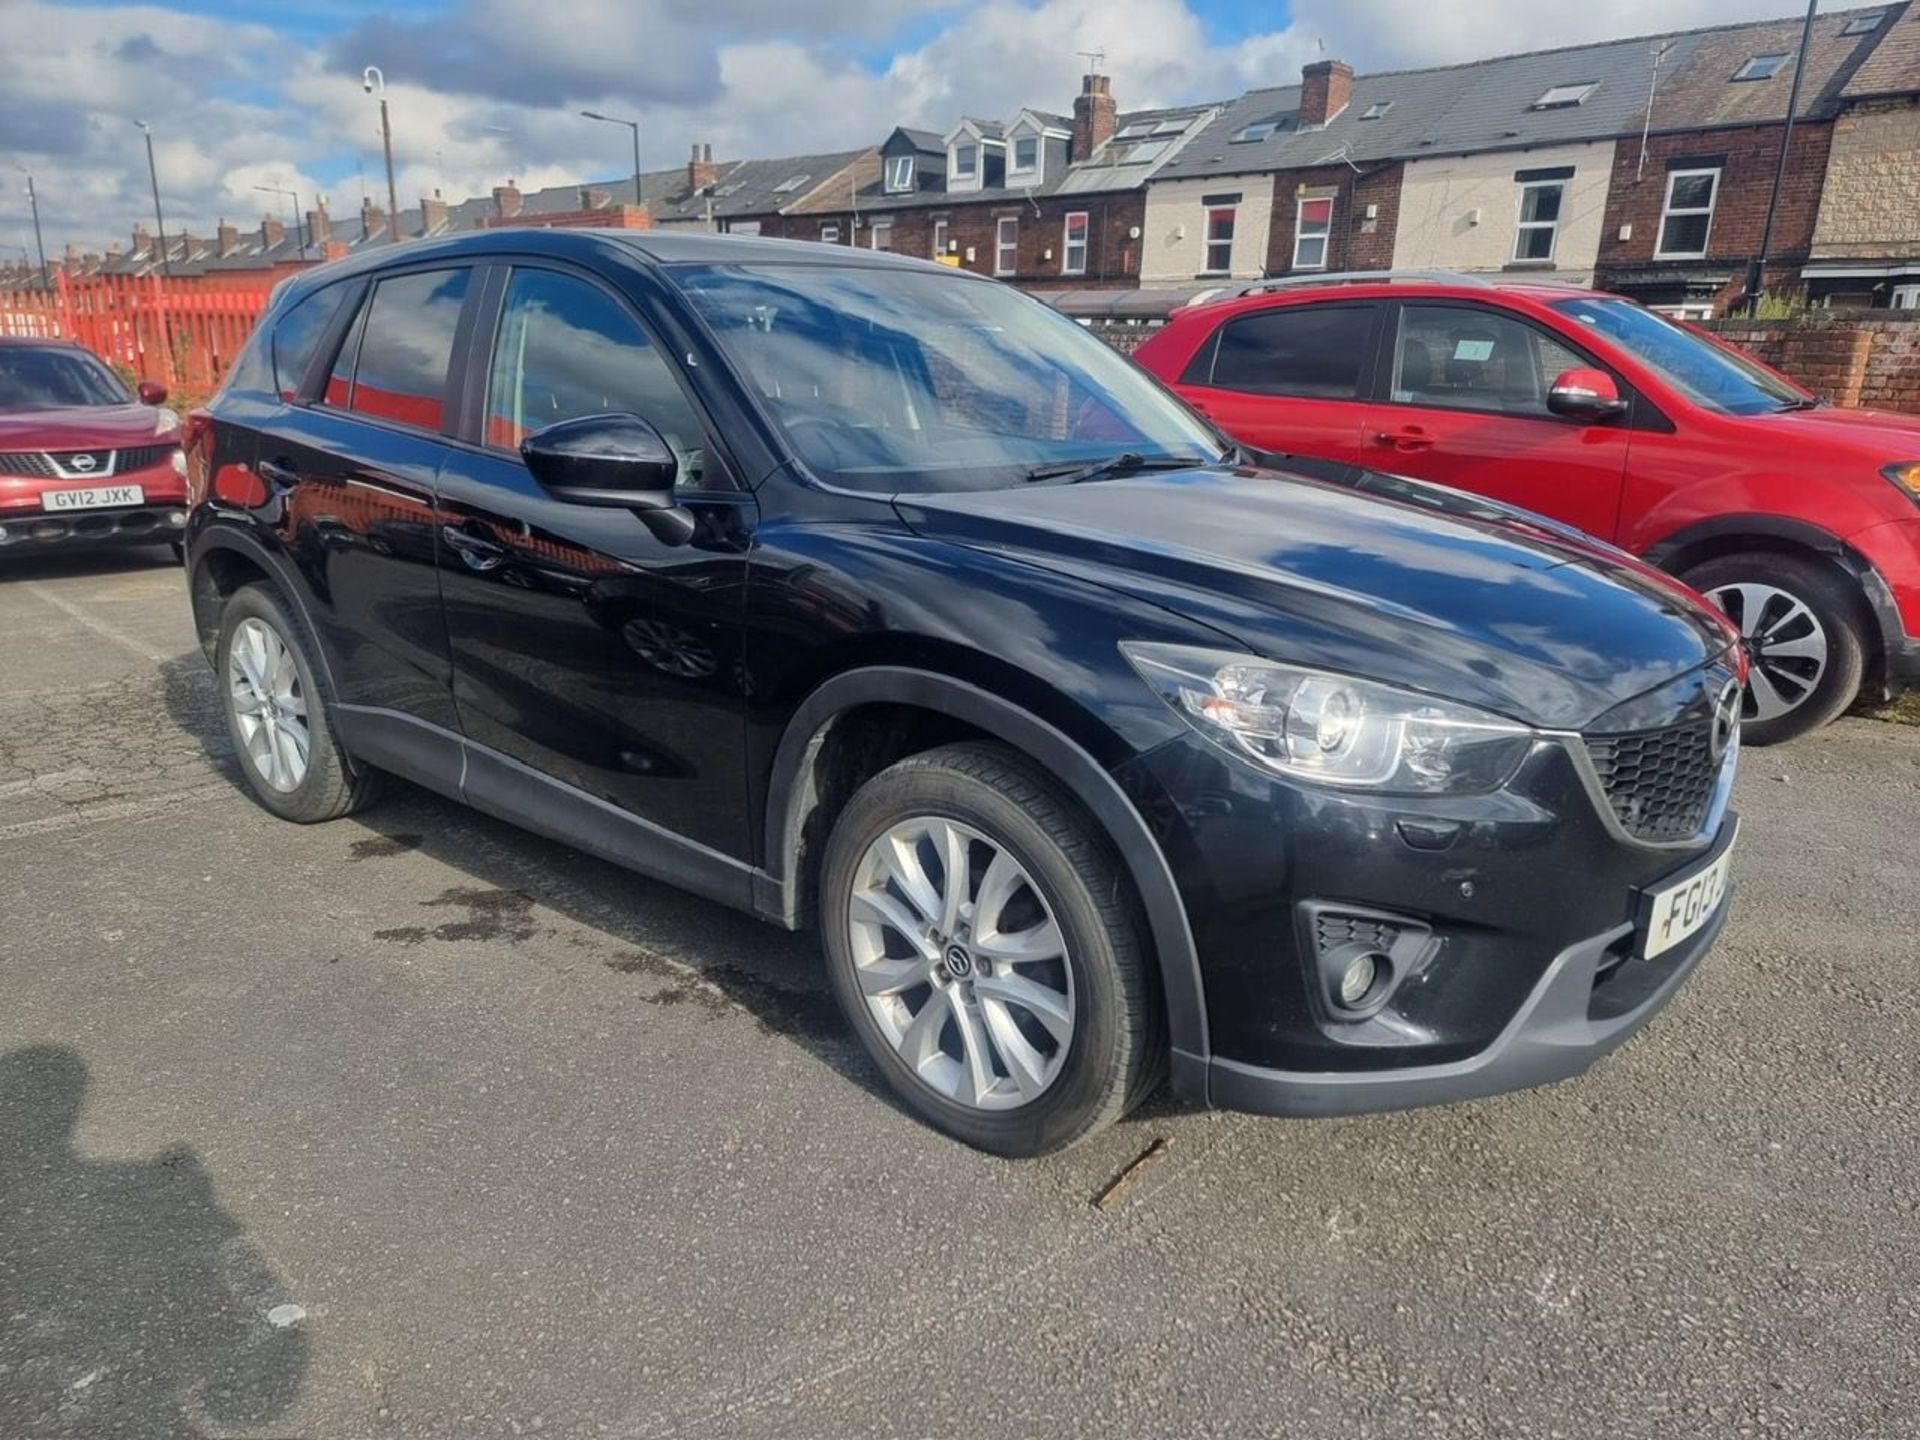 FG13 JOH MAZDA CX-5 2.2 D 150 SPORT 2WD Station Wagon. Comes with 1 key. Date of registration: 21/